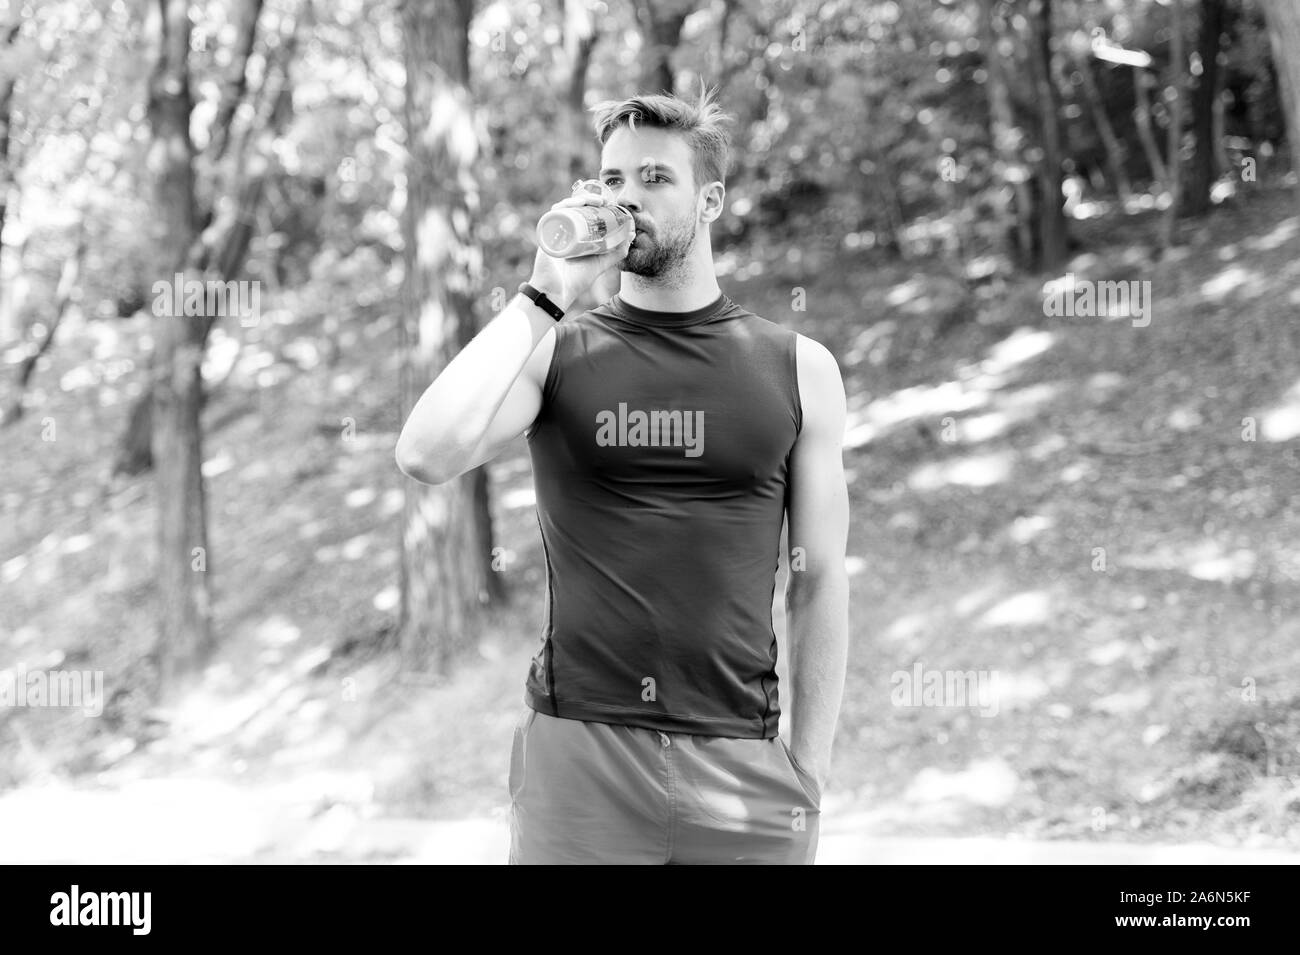 The water has a major role in sports. Thirsty sportsman drinking pure water on hot summer day. Fit athlete having a drink from water bottle during training outdoor. Keeping body water balance. Stock Photo